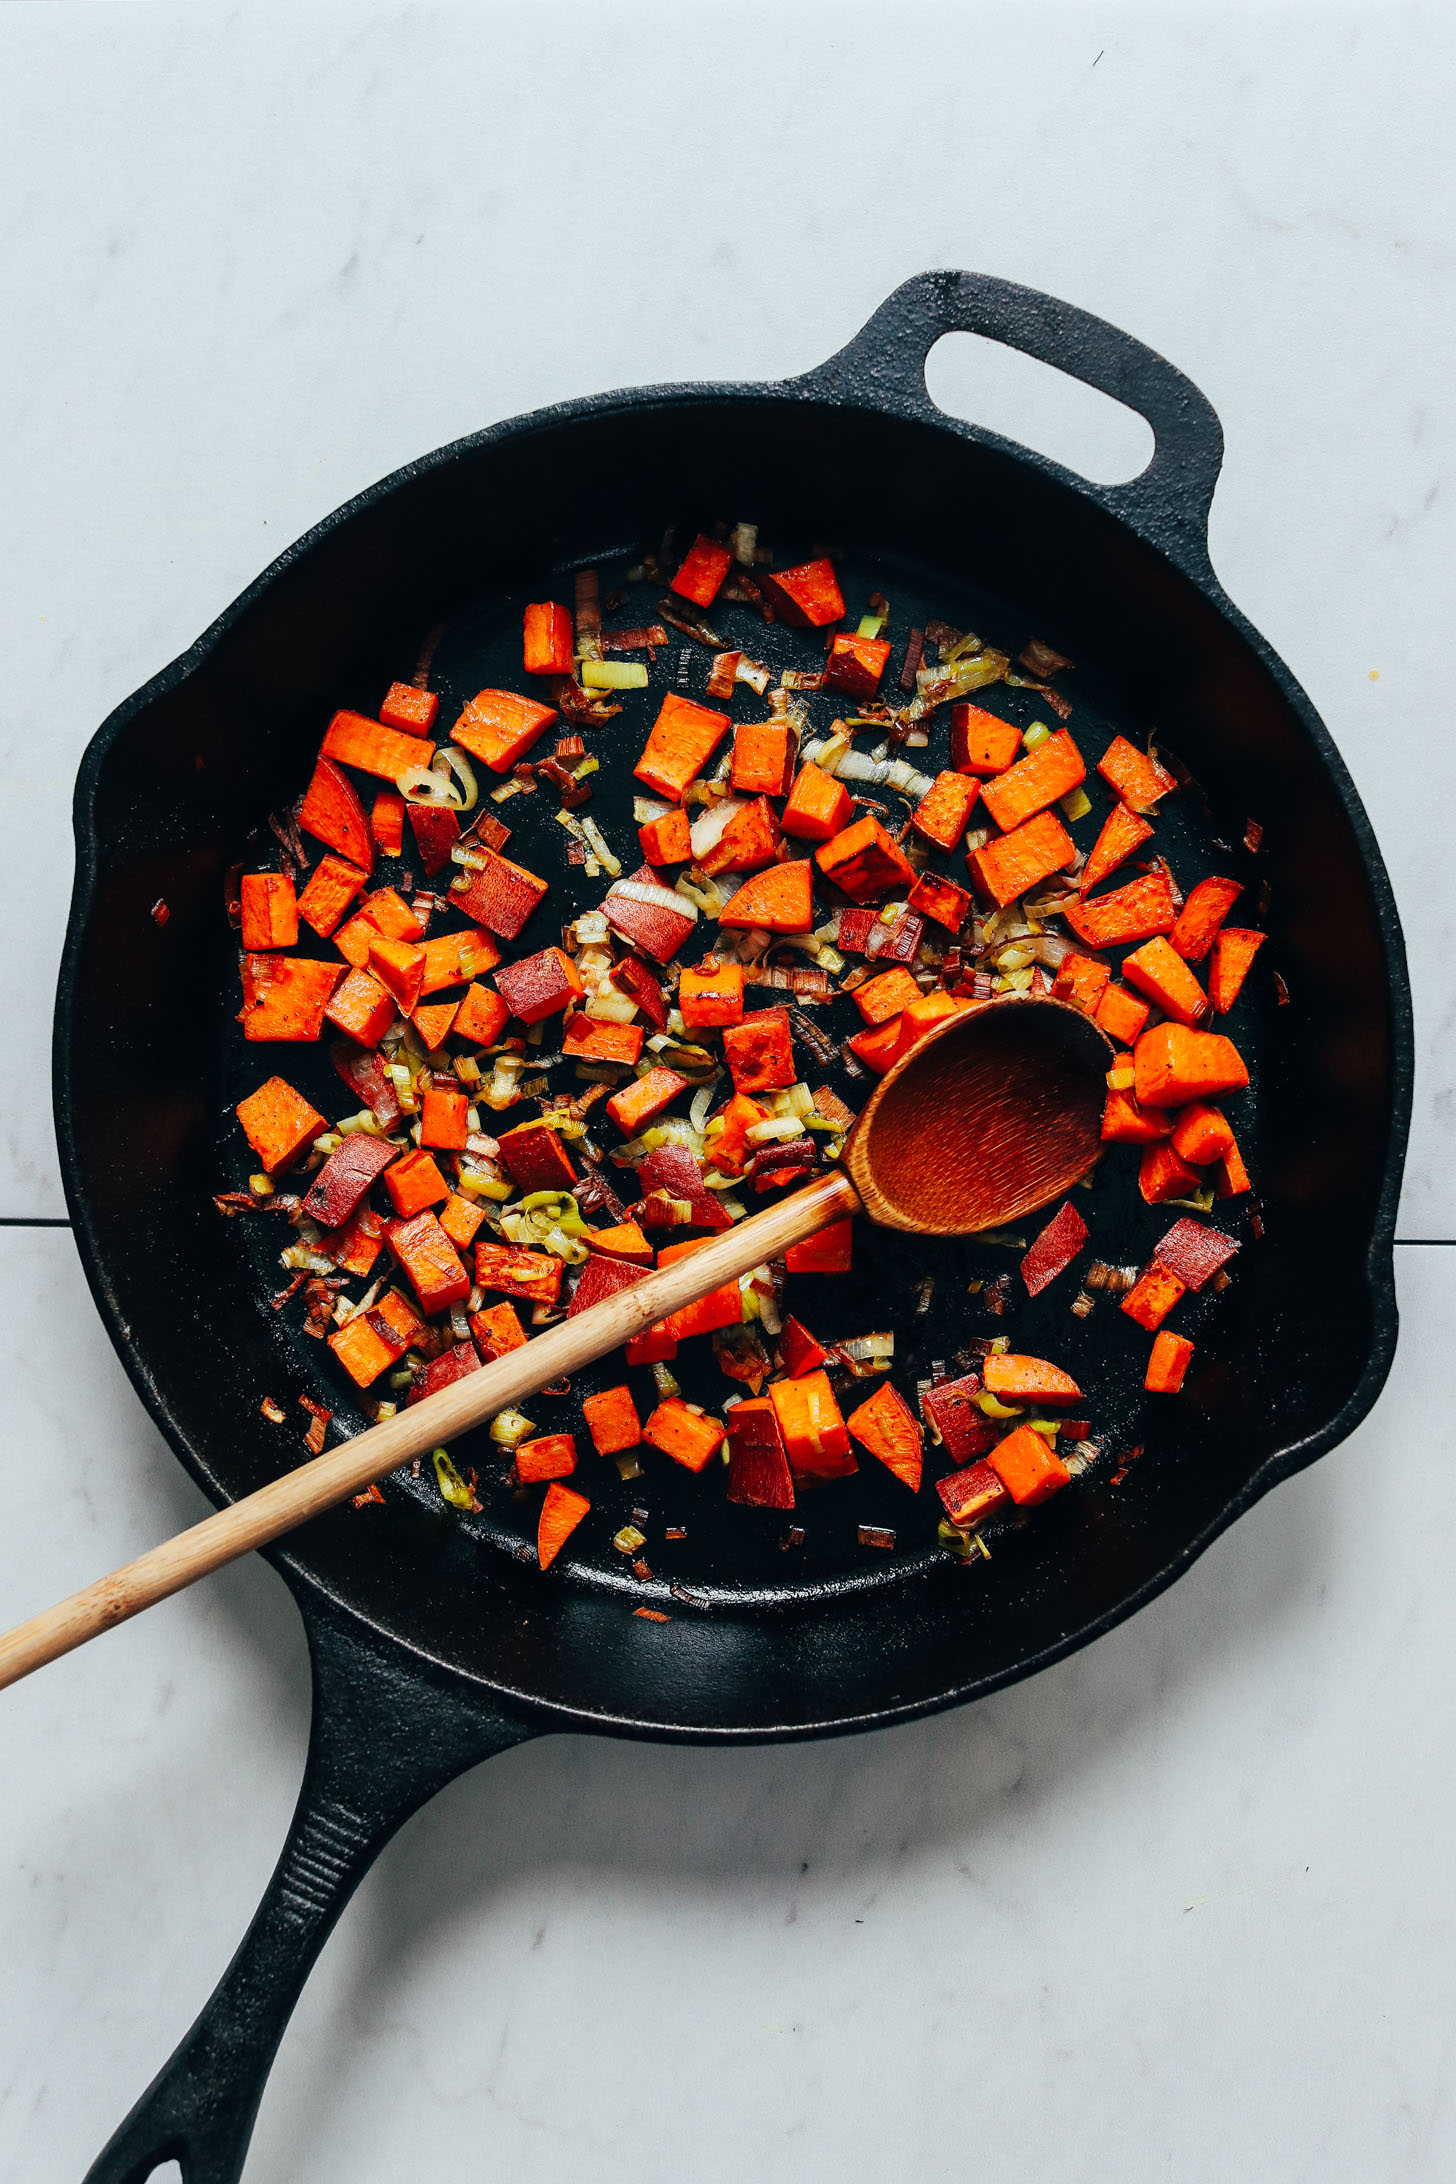 Cooking vegetables in a cast iron skillet